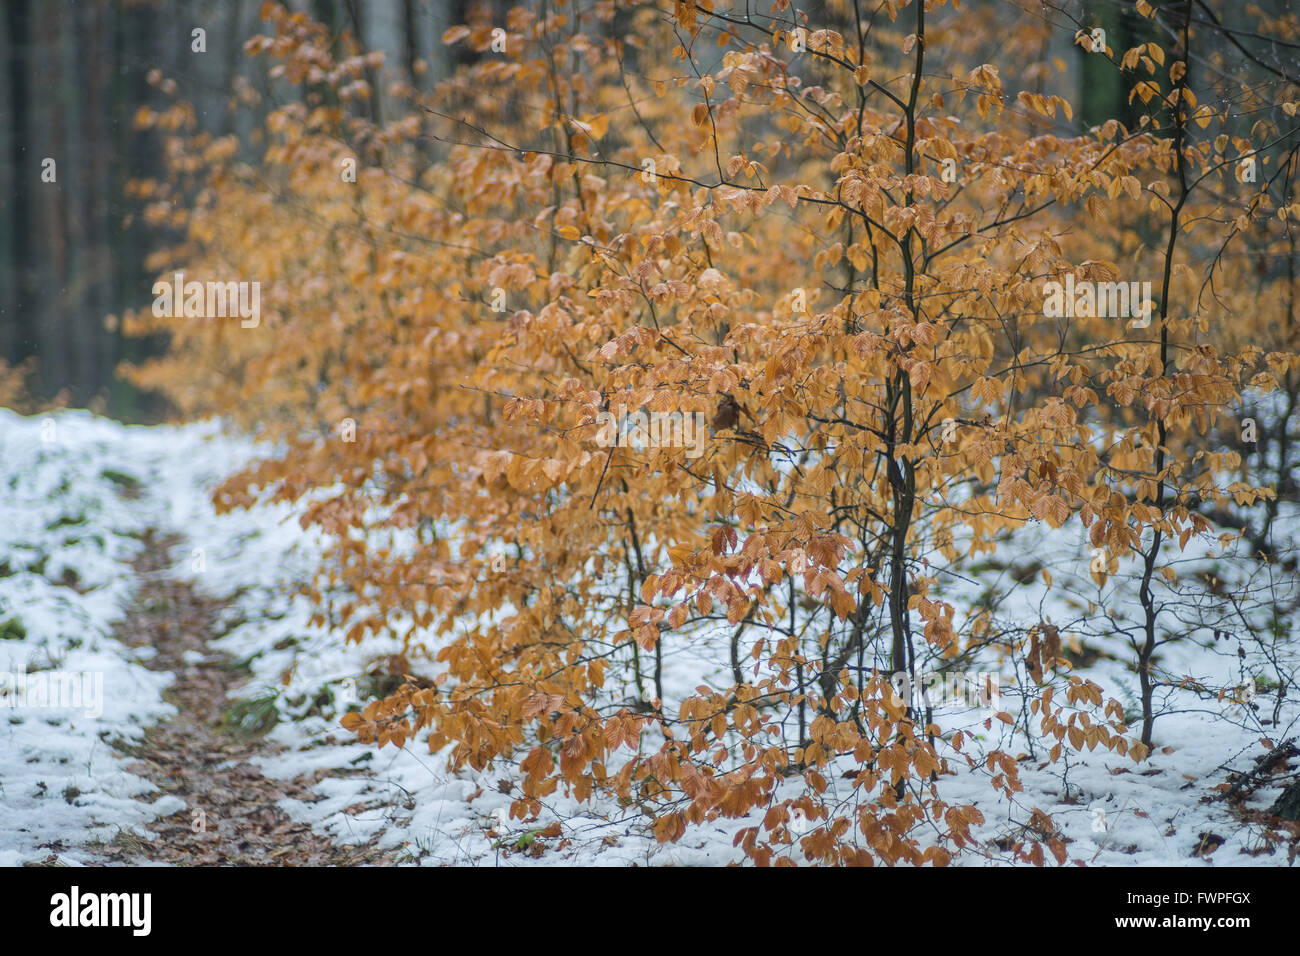 Young beech trees with withered leaves in winter Fagus sylvatica Stock Photo